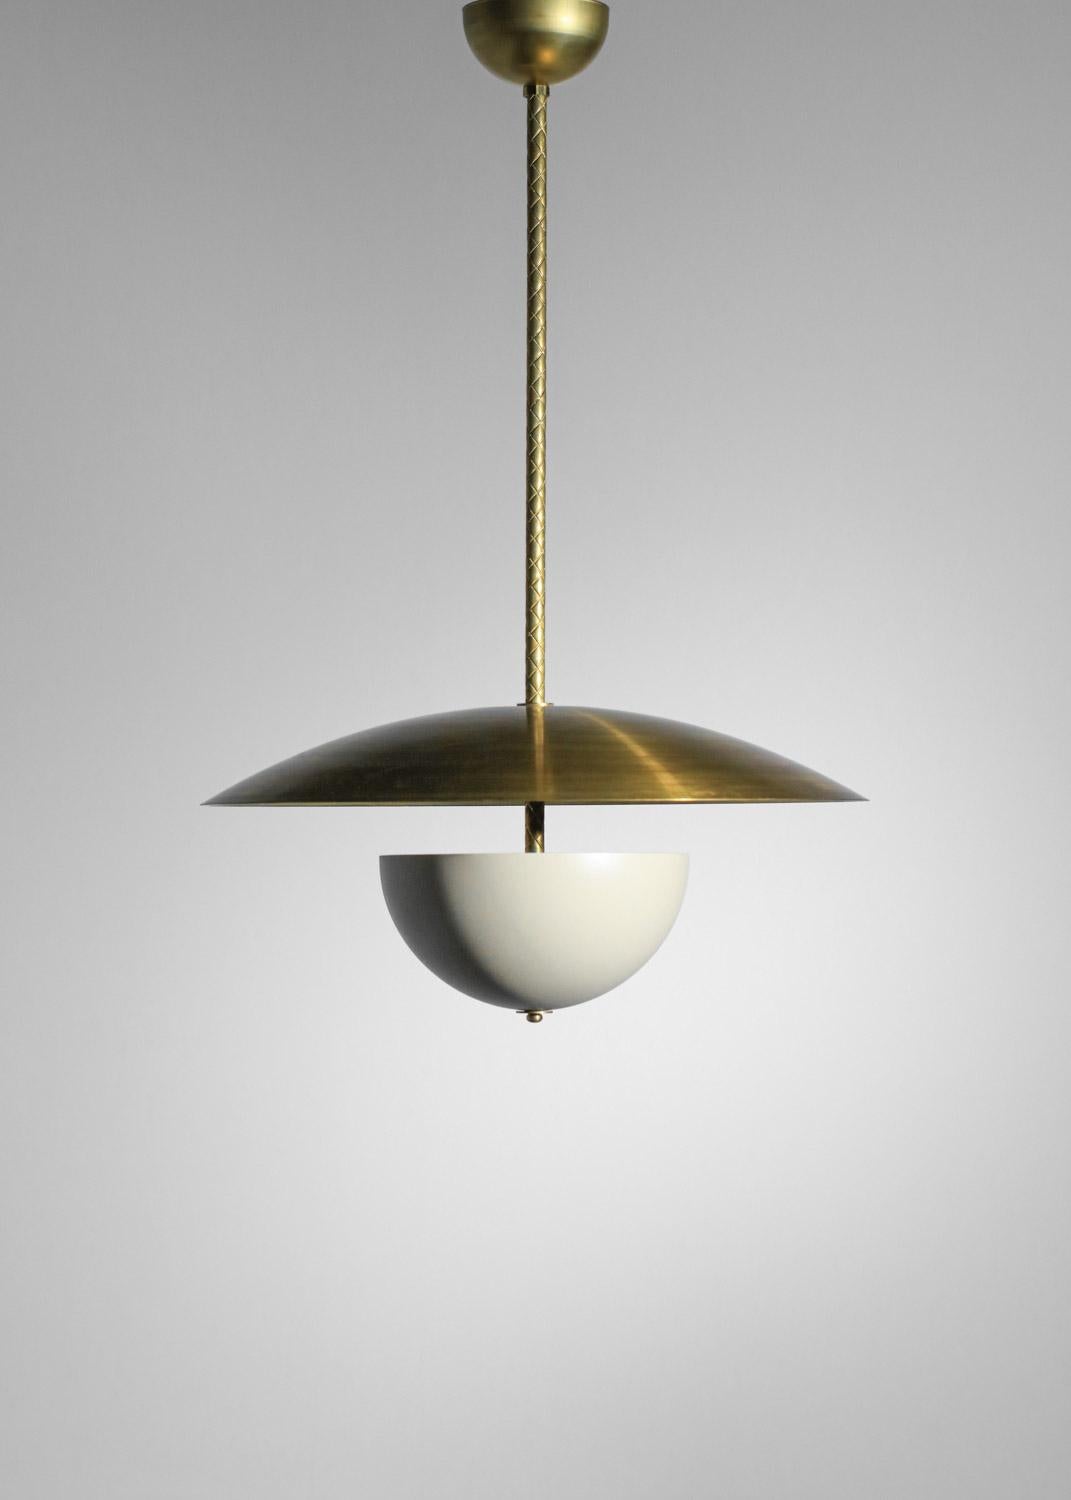 This chandelier is composed of a solid brass dome, a large beige lacquered central shade and a fixing bar with a patinated solid brass bell. We recommend three E14 LED bulbs for this fixture. Realization of the order.